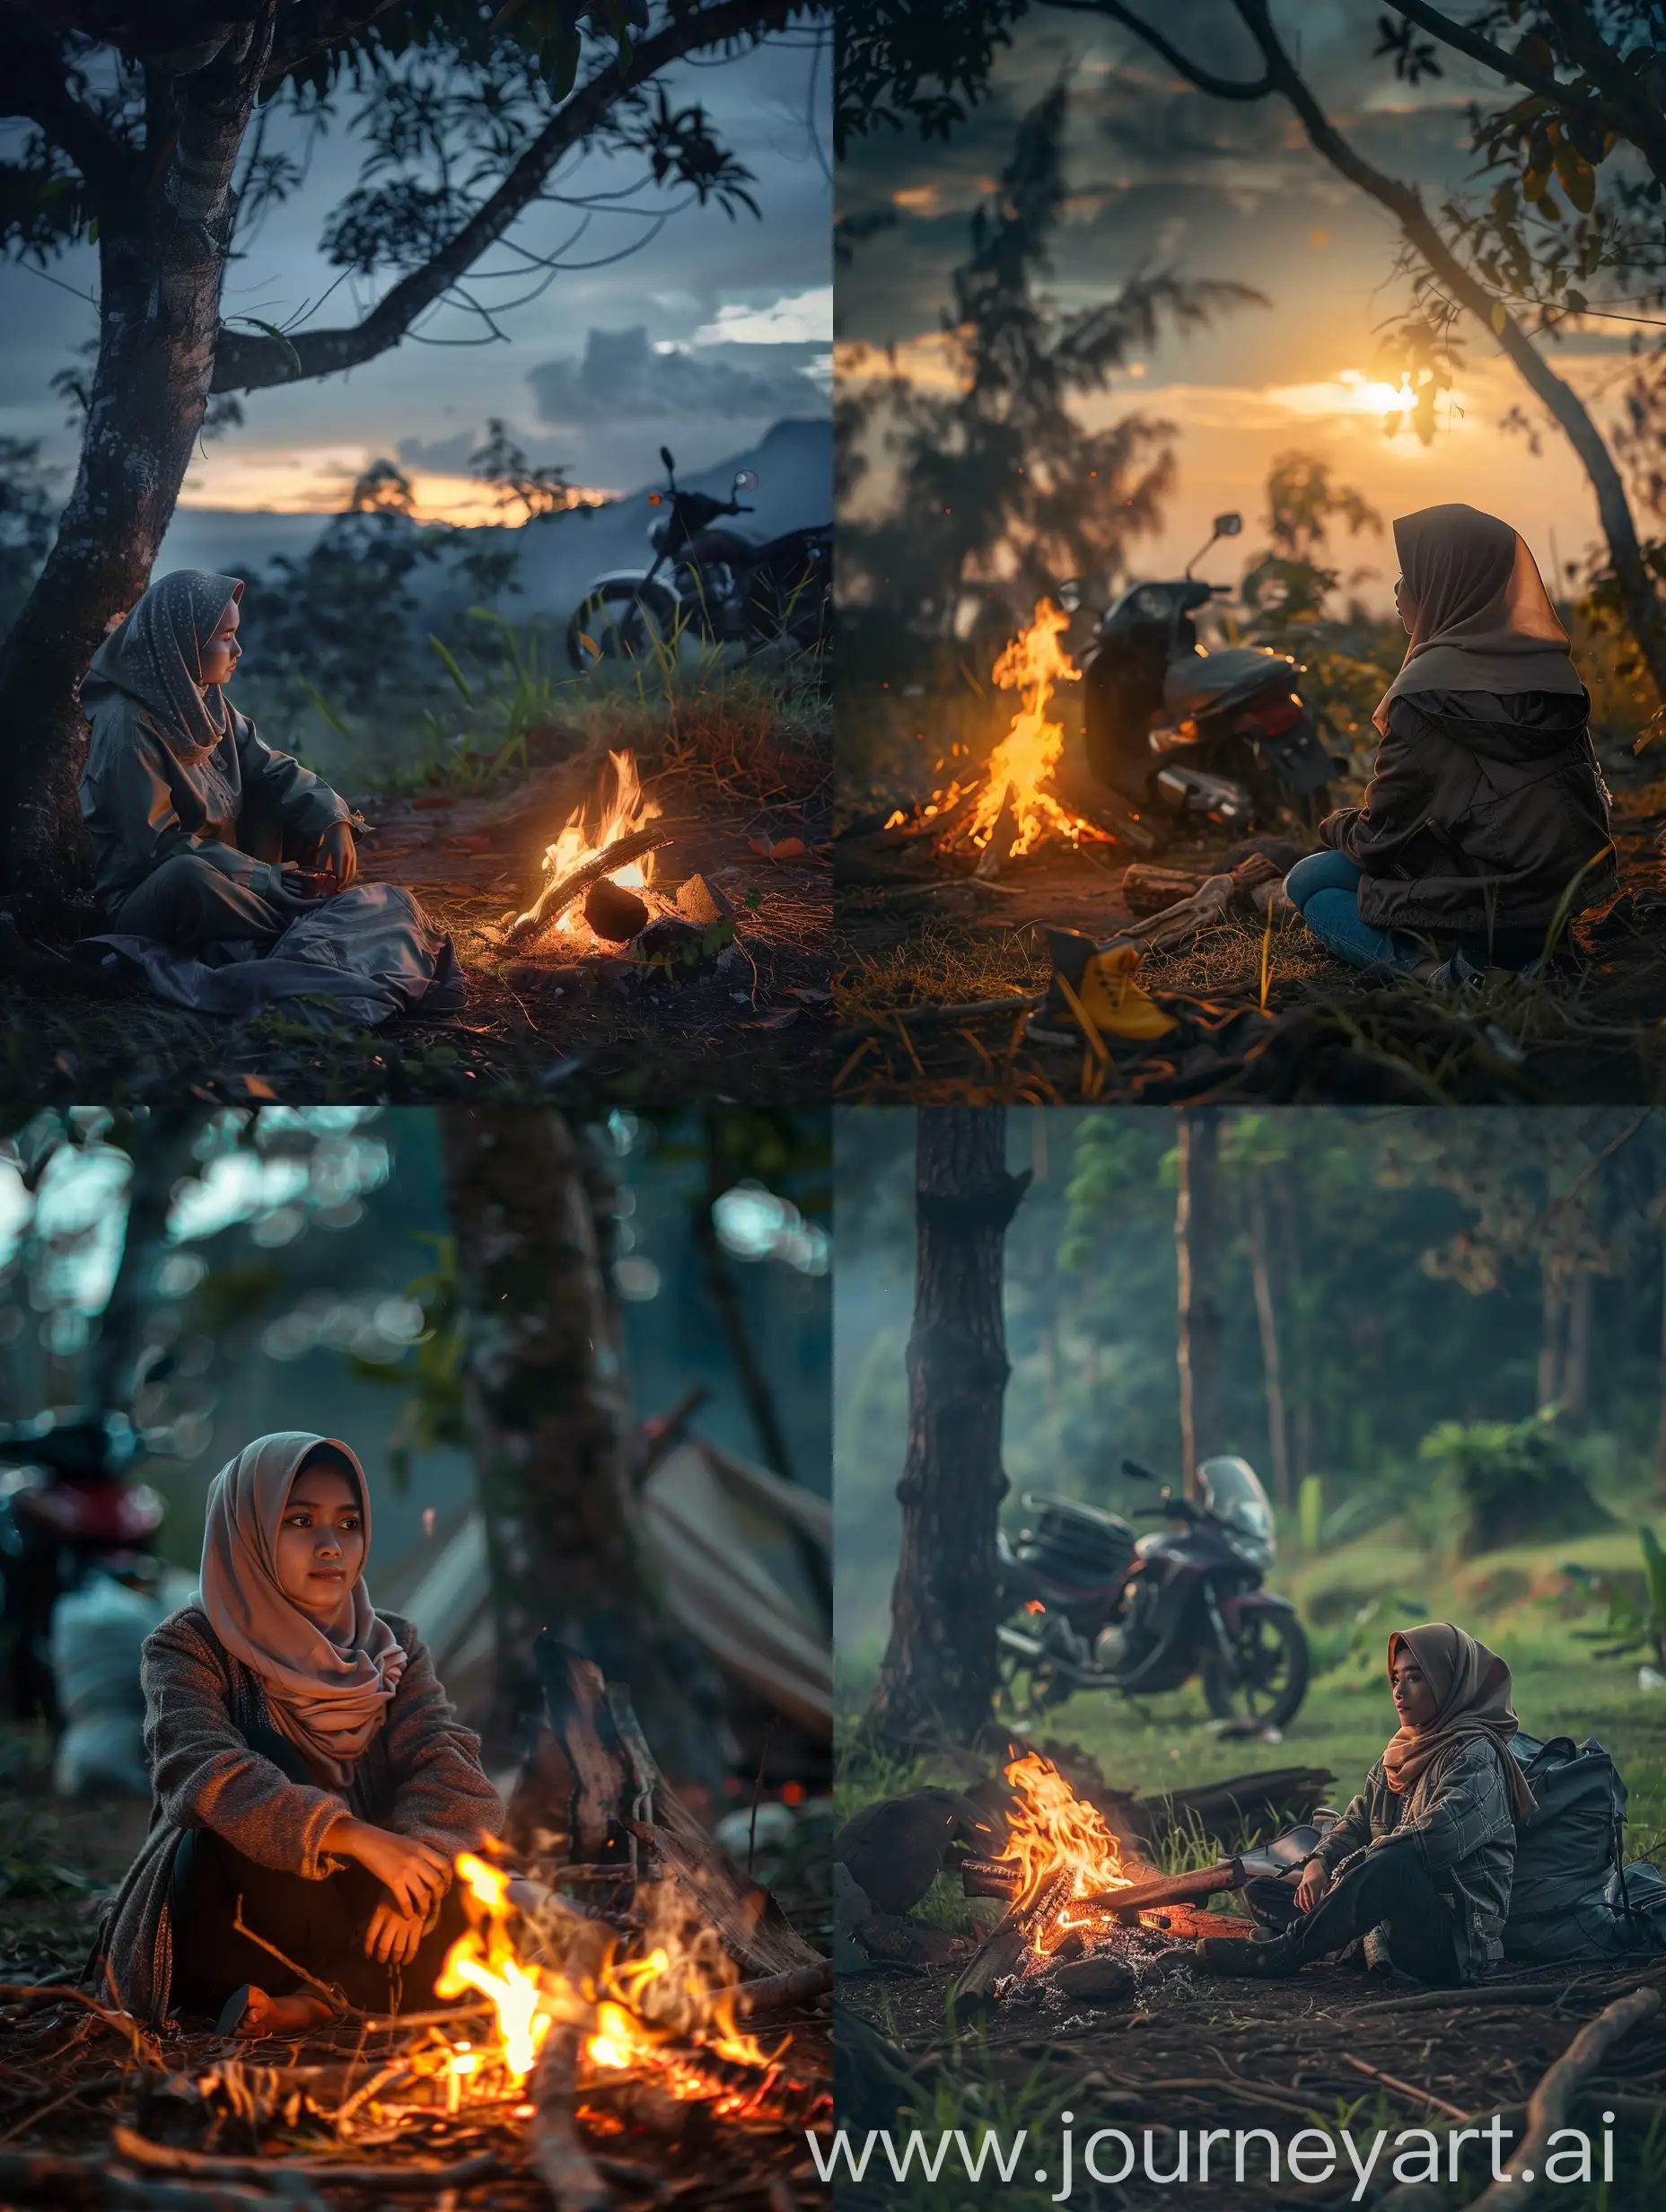 Indonesian-Javanese-Hijab-Woman-Sitting-Near-Campfire-at-Sunset-with-Harley-Motorbike